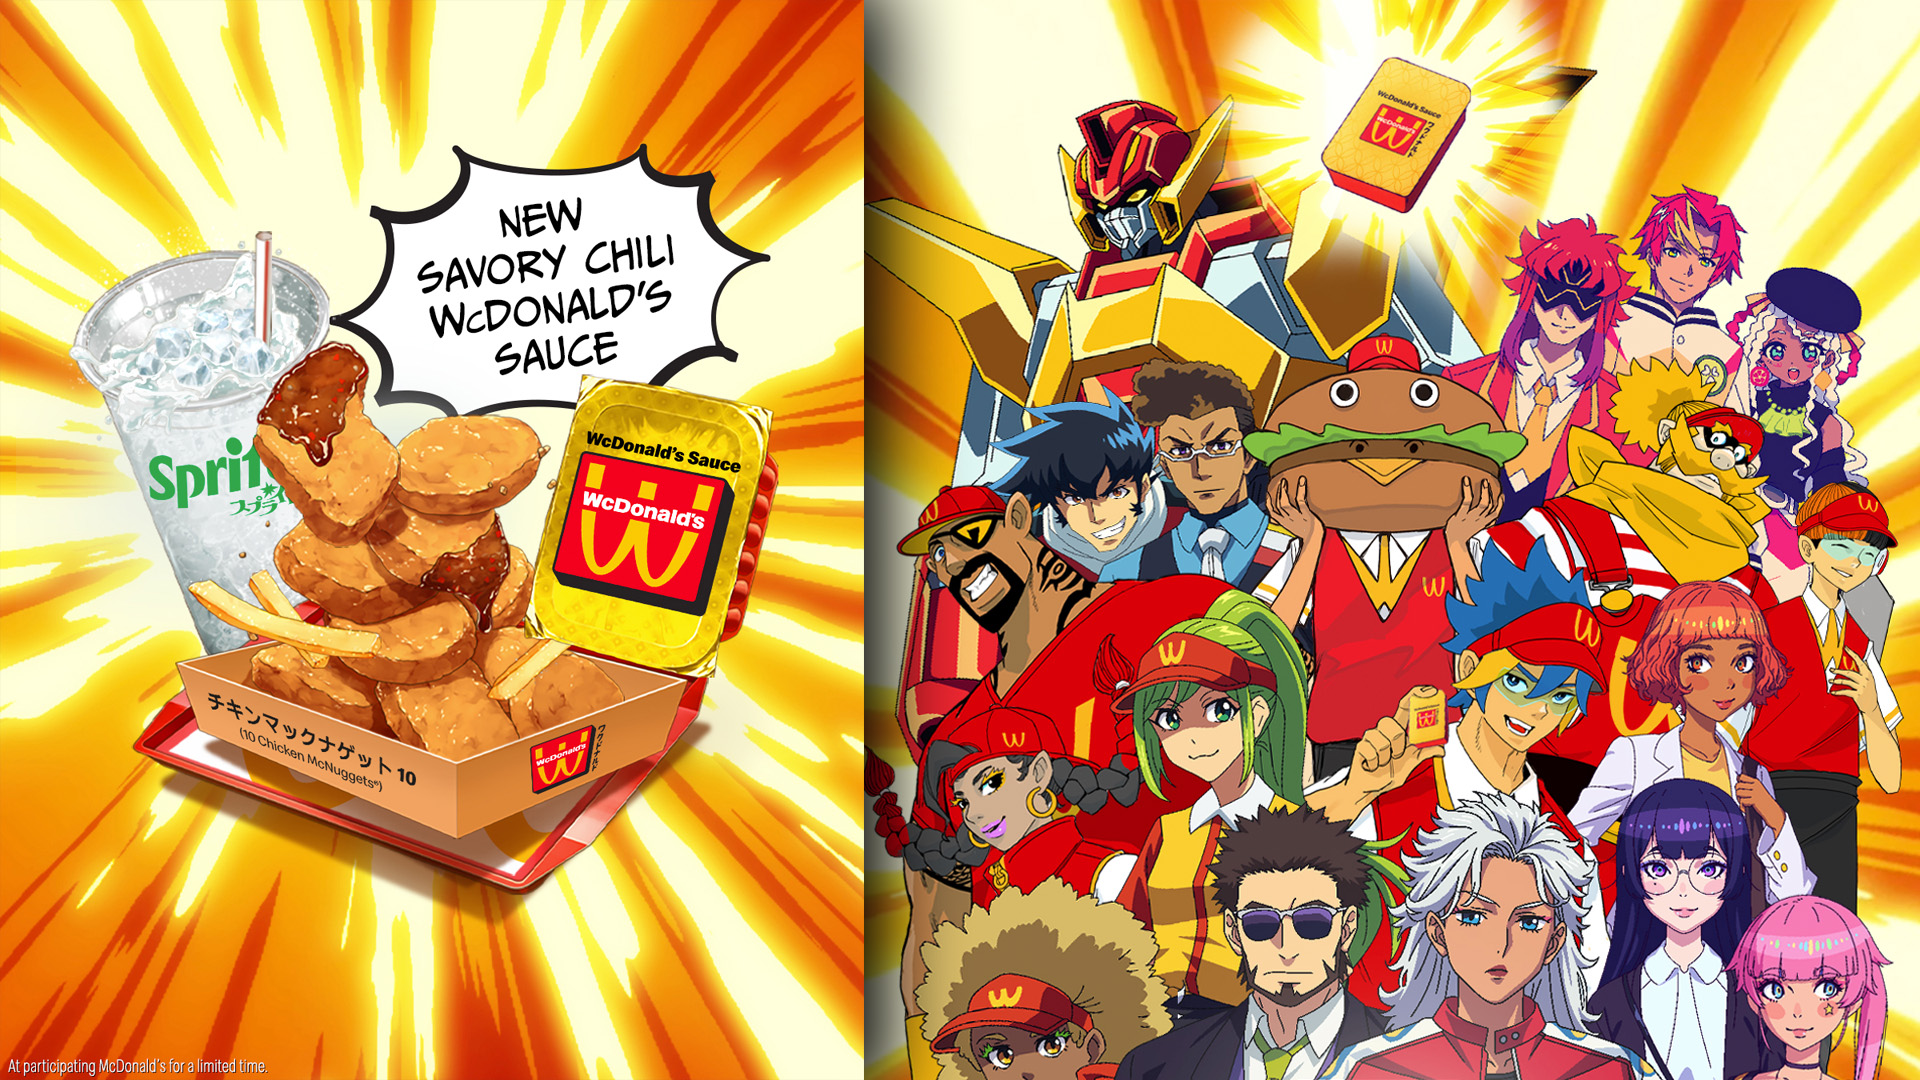 McDonald's Transforms Into WcDonald's For New Anime Project